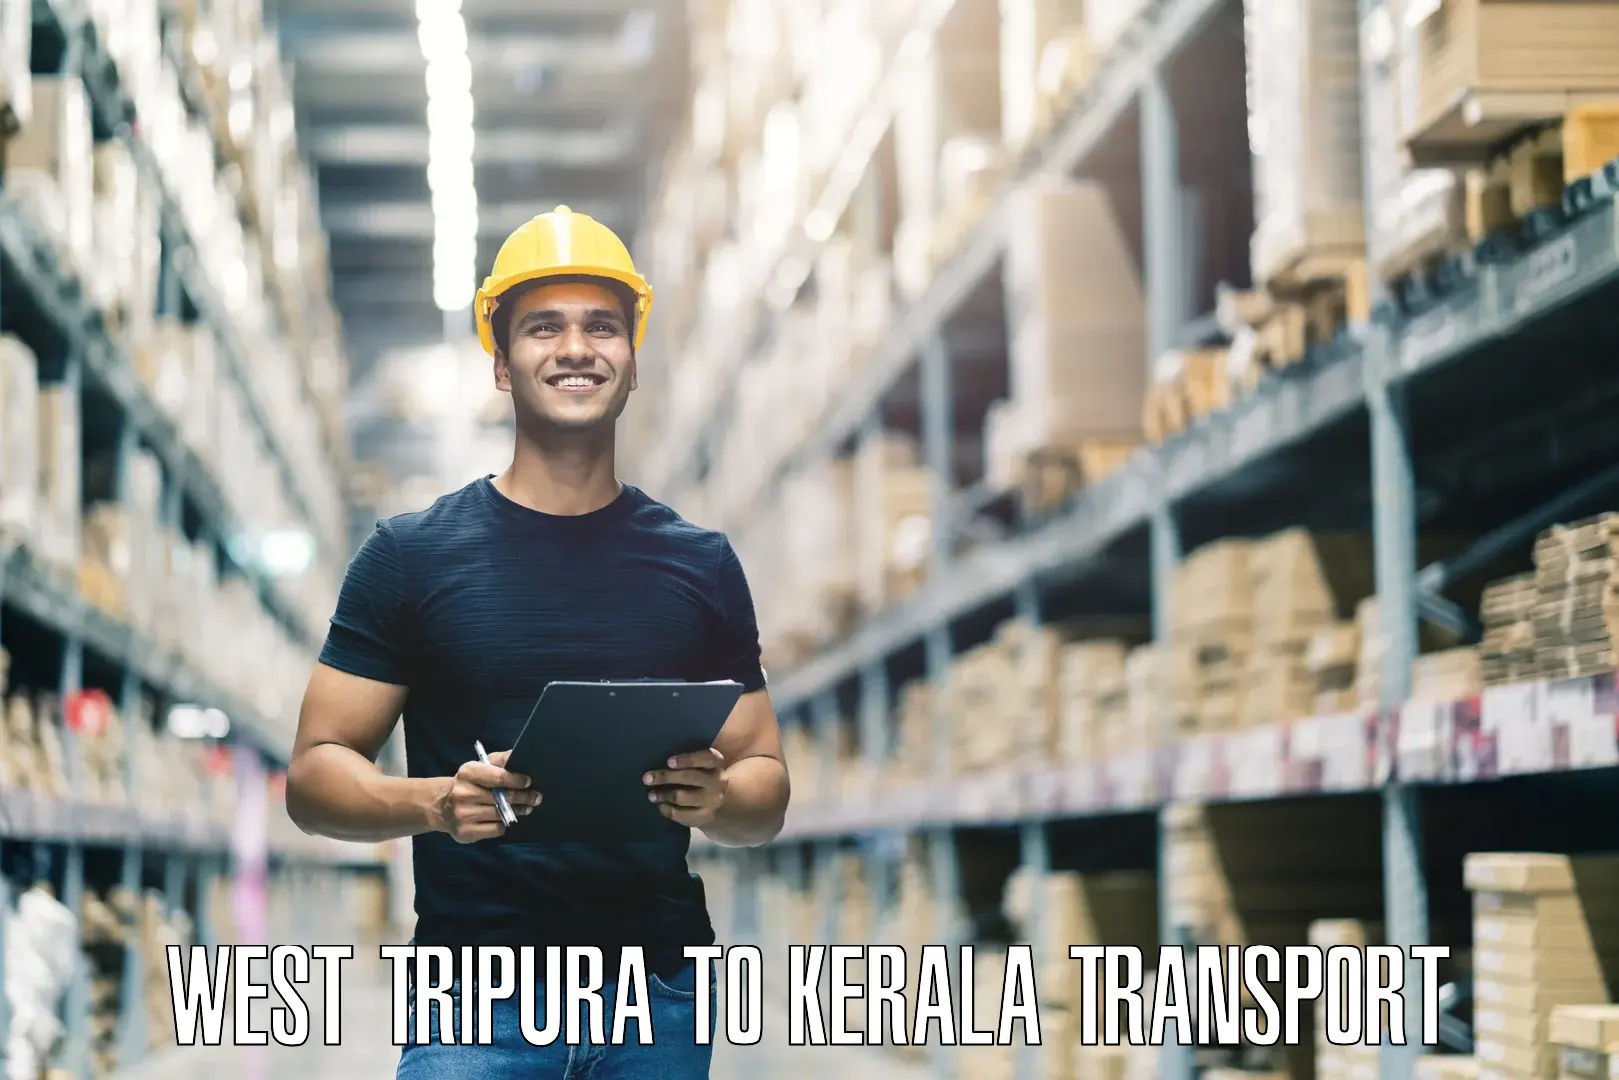 Online transport booking in West Tripura to Rajamudy